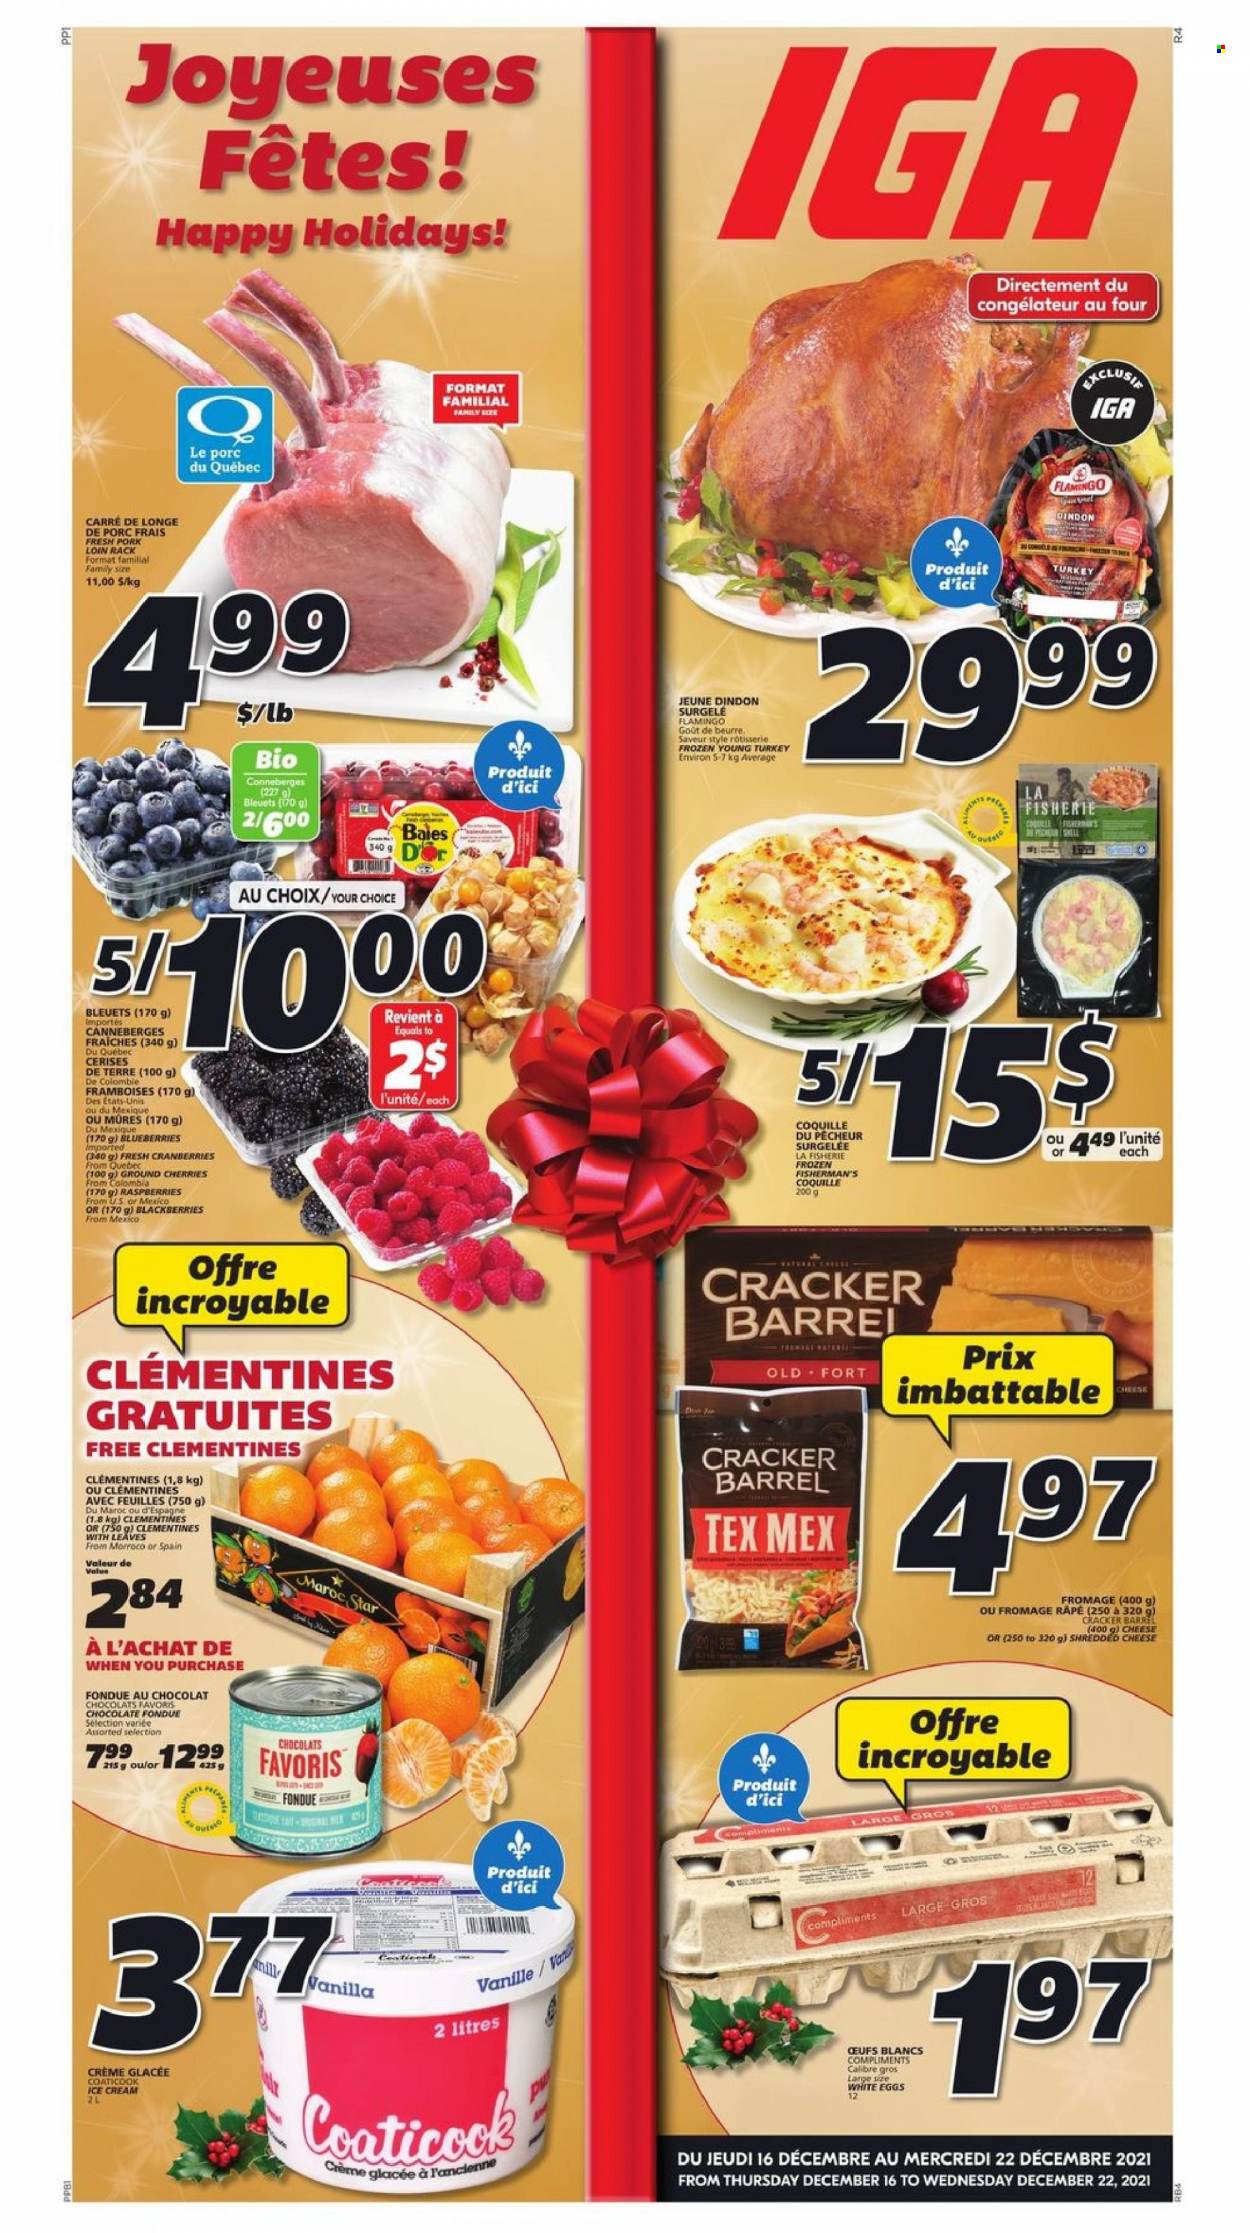 thumbnail - IGA Flyer - December 16, 2021 - December 22, 2021 - Sales products - blackberries, blueberries, clementines, cherries, shredded cheese, eggs, ice cream, crackers, cranberries, pork loin, pork meat. Page 1.